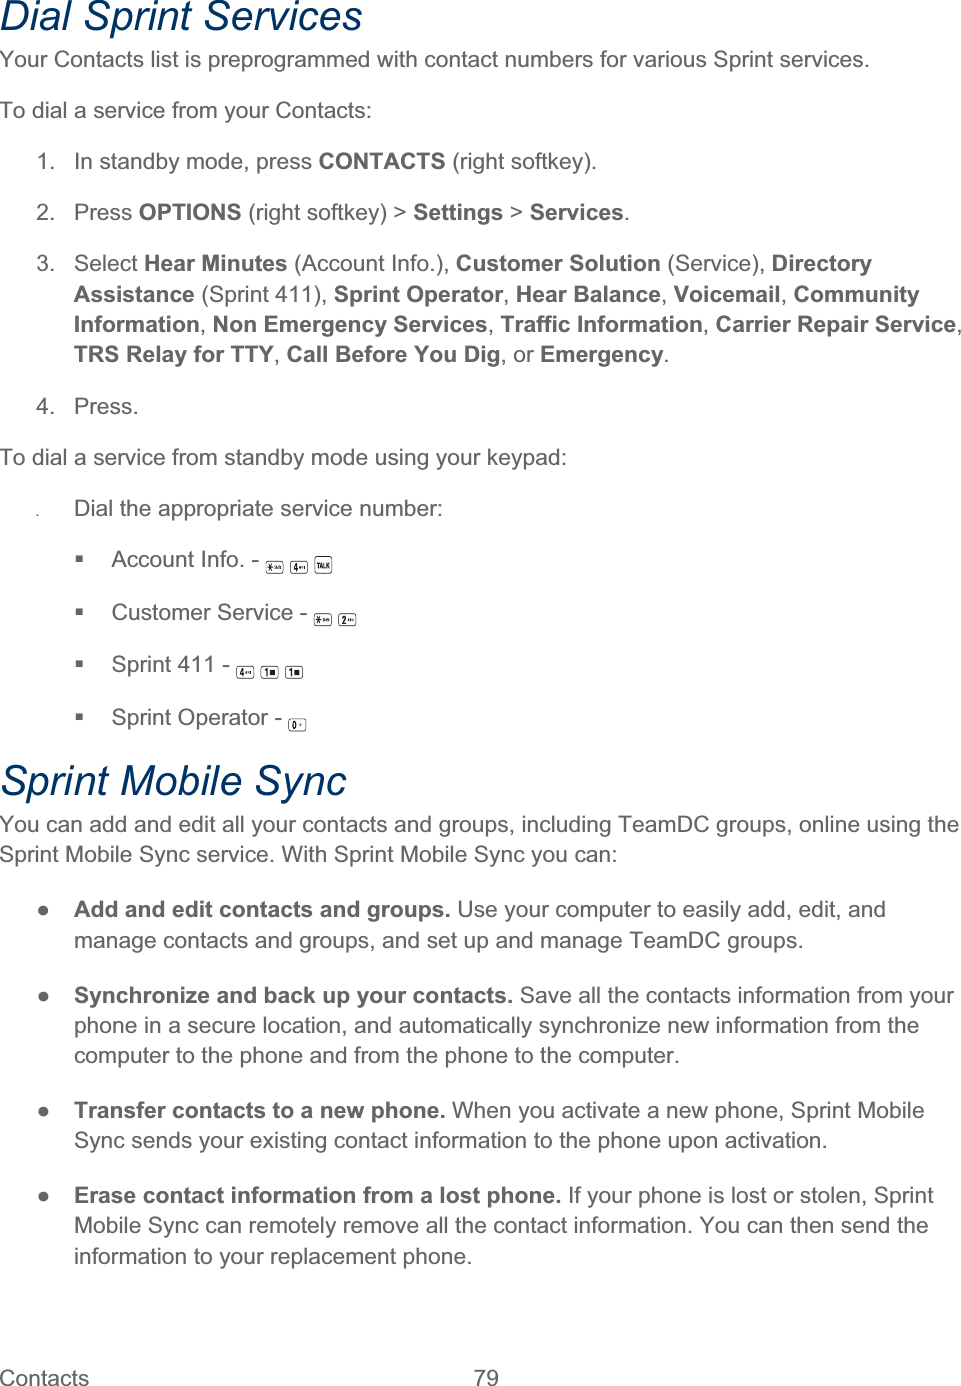 Contacts   79   Dial Sprint Services Your Contacts list is preprogrammed with contact numbers for various Sprint services. To dial a service from your Contacts: 1.  In standby mode, press CONTACTS (right softkey). 2. Press OPTIONS (right softkey) &gt; Settings &gt; Services.3. Select Hear Minutes (Account Info.), Customer Solution (Service), Directory Assistance (Sprint 411), Sprint Operator,Hear Balance,Voicemail,Community Information,Non Emergency Services,Traffic Information,Carrier Repair Service,TRS Relay for TTY,Call Before You Dig, or Emergency.4. Press. To dial a service from standby mode using your keypad: ʇDial the appropriate service number:   Account Info. -   Customer Service -   Sprint 411 -   Sprint Operator - Sprint Mobile Sync You can add and edit all your contacts and groups, including TeamDC groups, online using the Sprint Mobile Sync service. With Sprint Mobile Sync you can: ŏAdd and edit contacts and groups. Use your computer to easily add, edit, and manage contacts and groups, and set up and manage TeamDC groups. ŏSynchronize and back up your contacts. Save all the contacts information from your phone in a secure location, and automatically synchronize new information from the computer to the phone and from the phone to the computer. ŏTransfer contacts to a new phone. When you activate a new phone, Sprint Mobile Sync sends your existing contact information to the phone upon activation. ŏErase contact information from a lost phone. If your phone is lost or stolen, Sprint Mobile Sync can remotely remove all the contact information. You can then send the information to your replacement phone. 